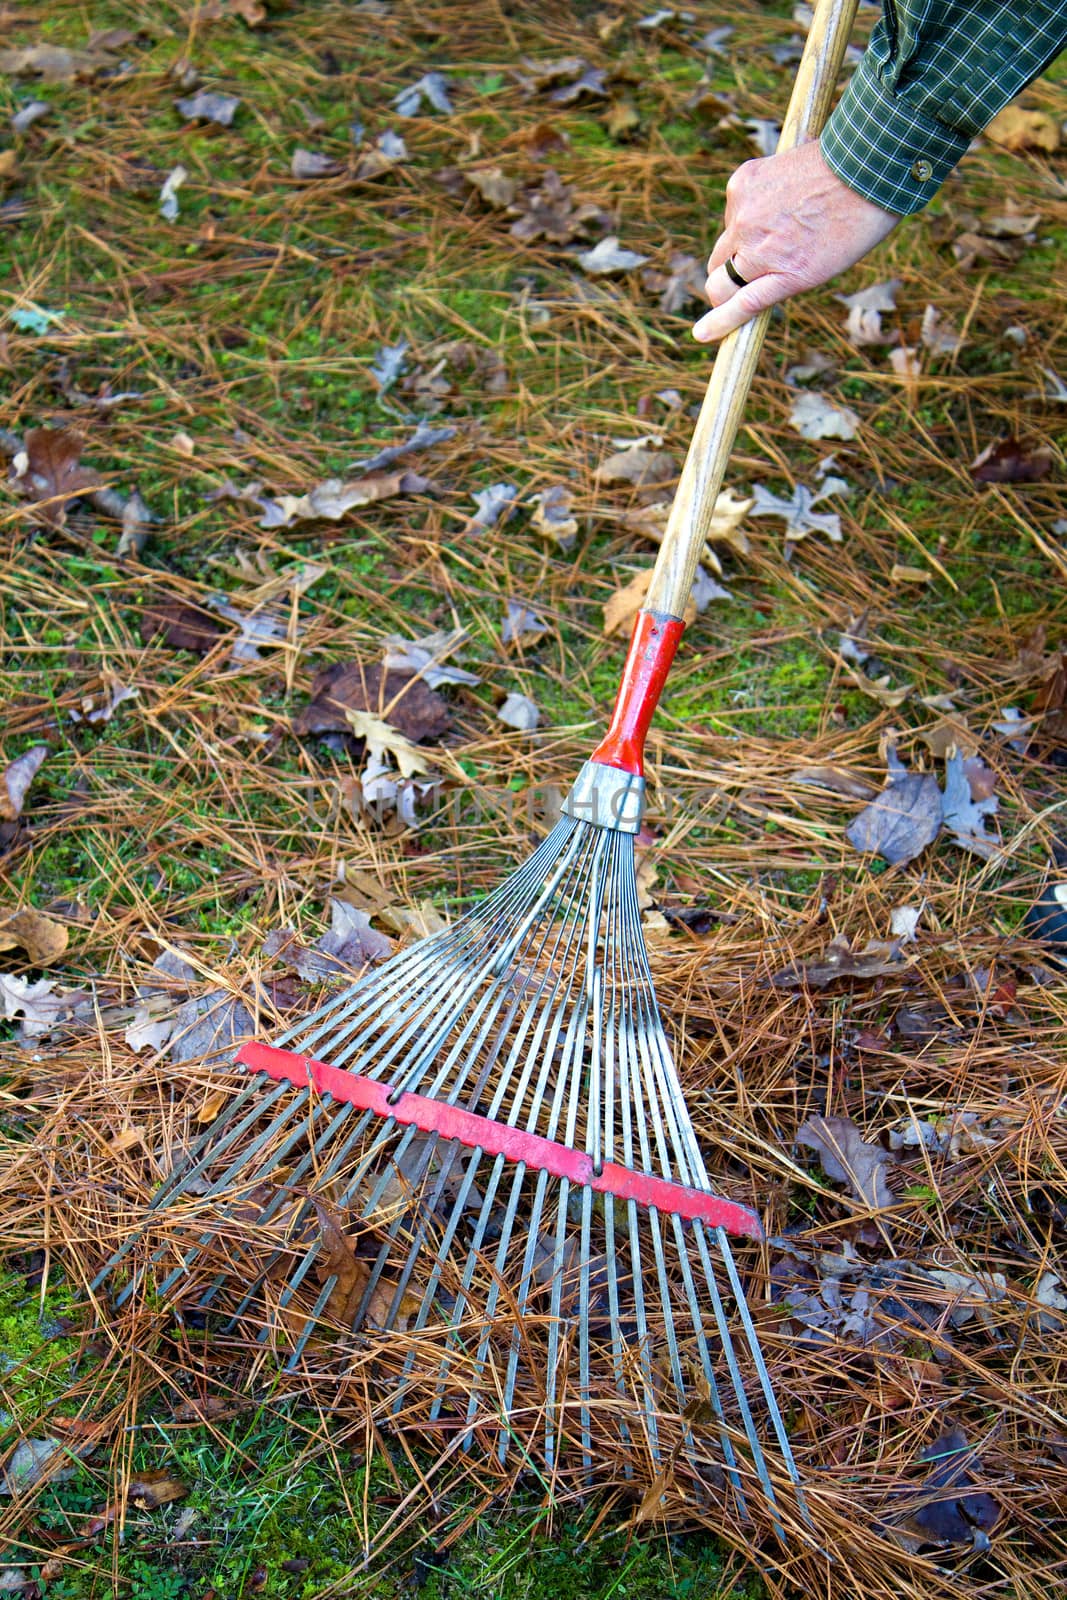 Man gathers up fall leaves and pine needles with an old rake.